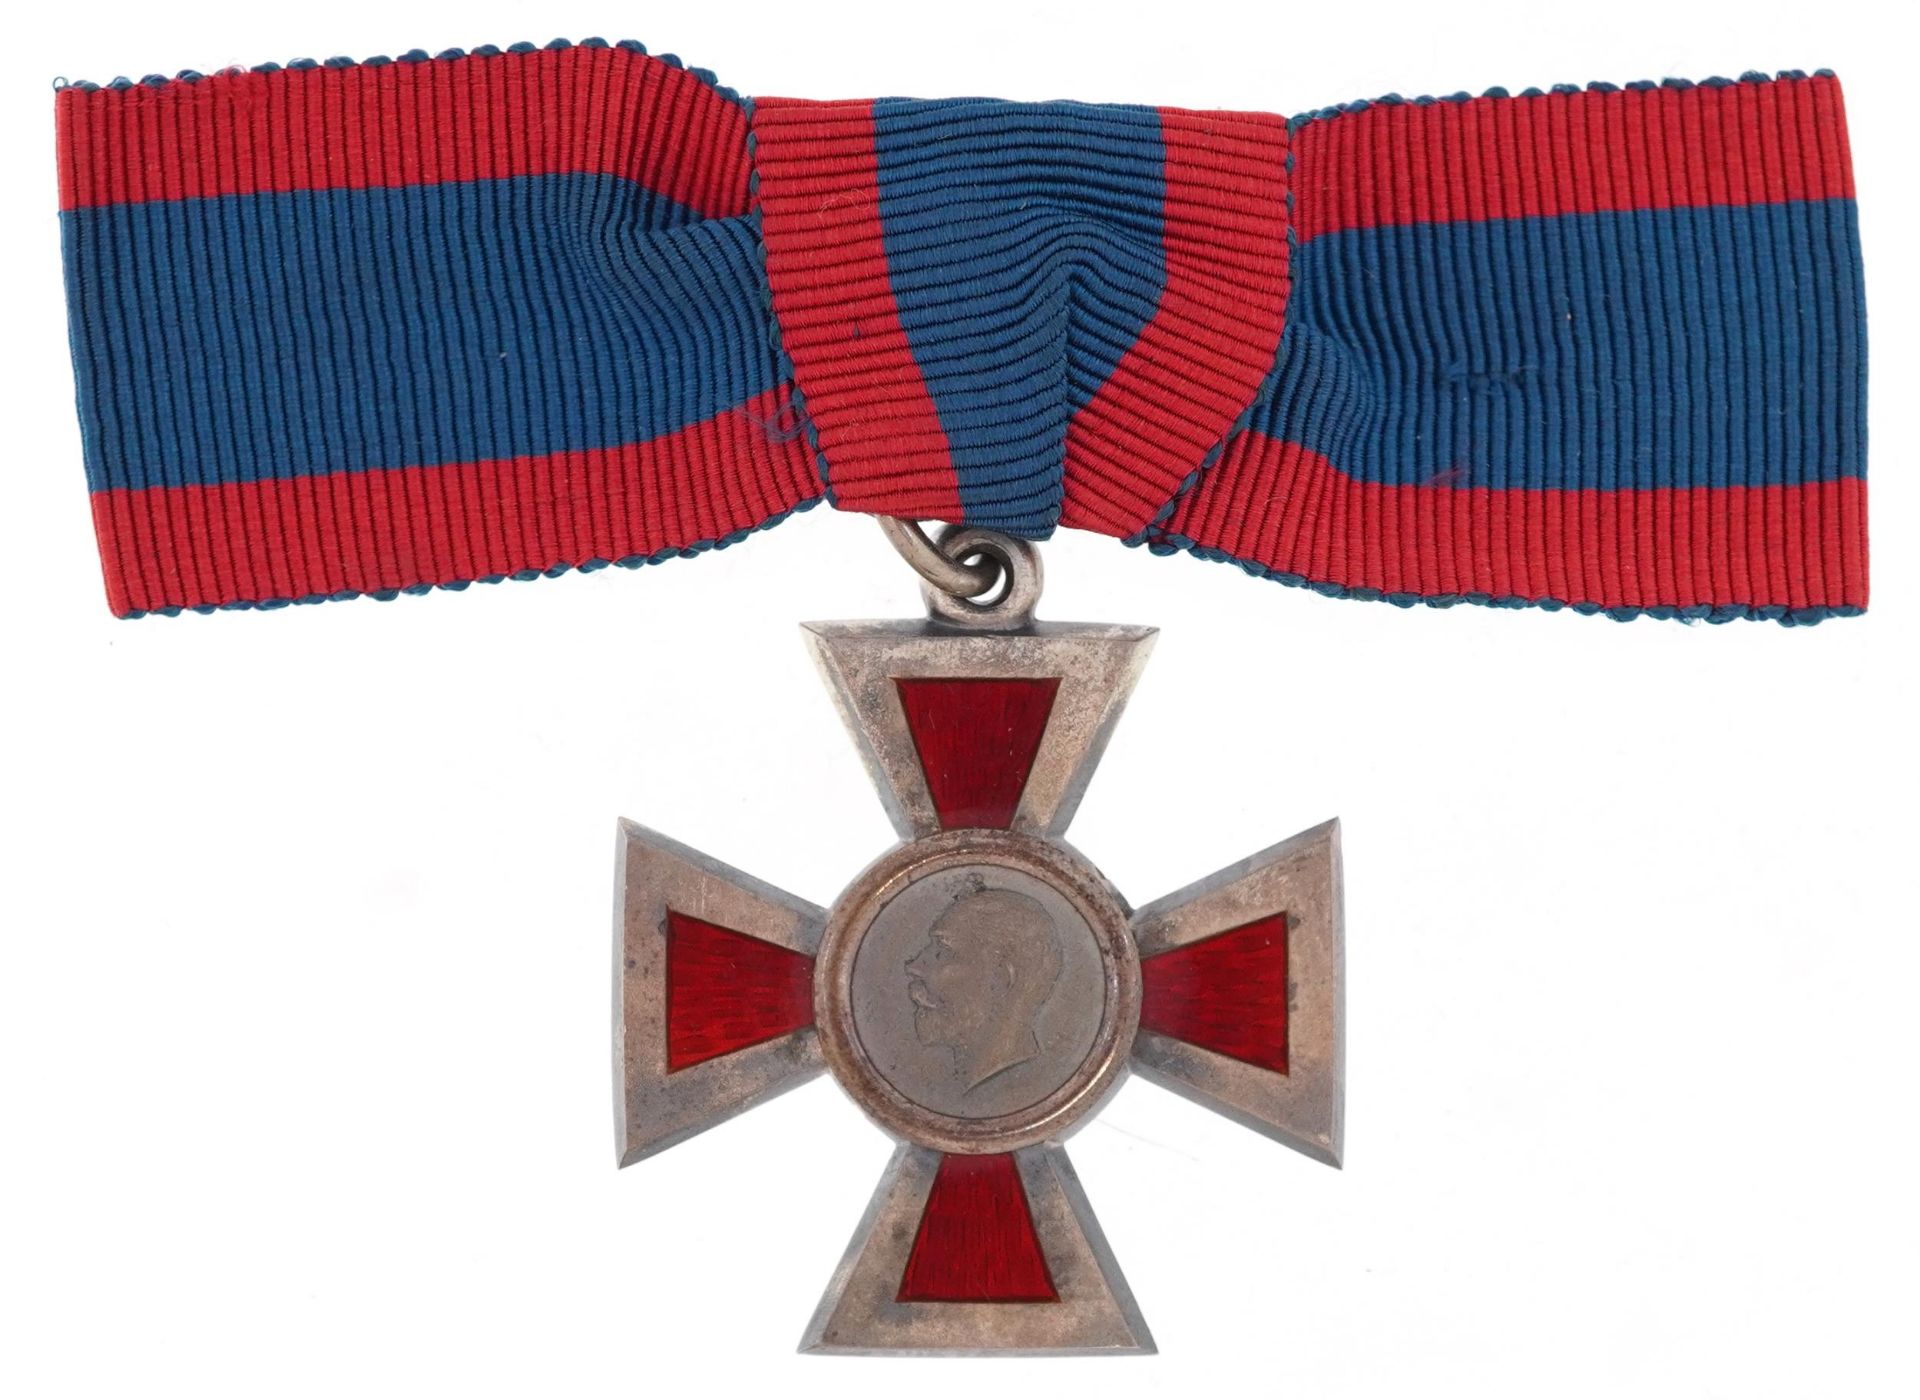 British Royal Red Cross medal housed in a Garrard & Co Limited box - Image 2 of 4